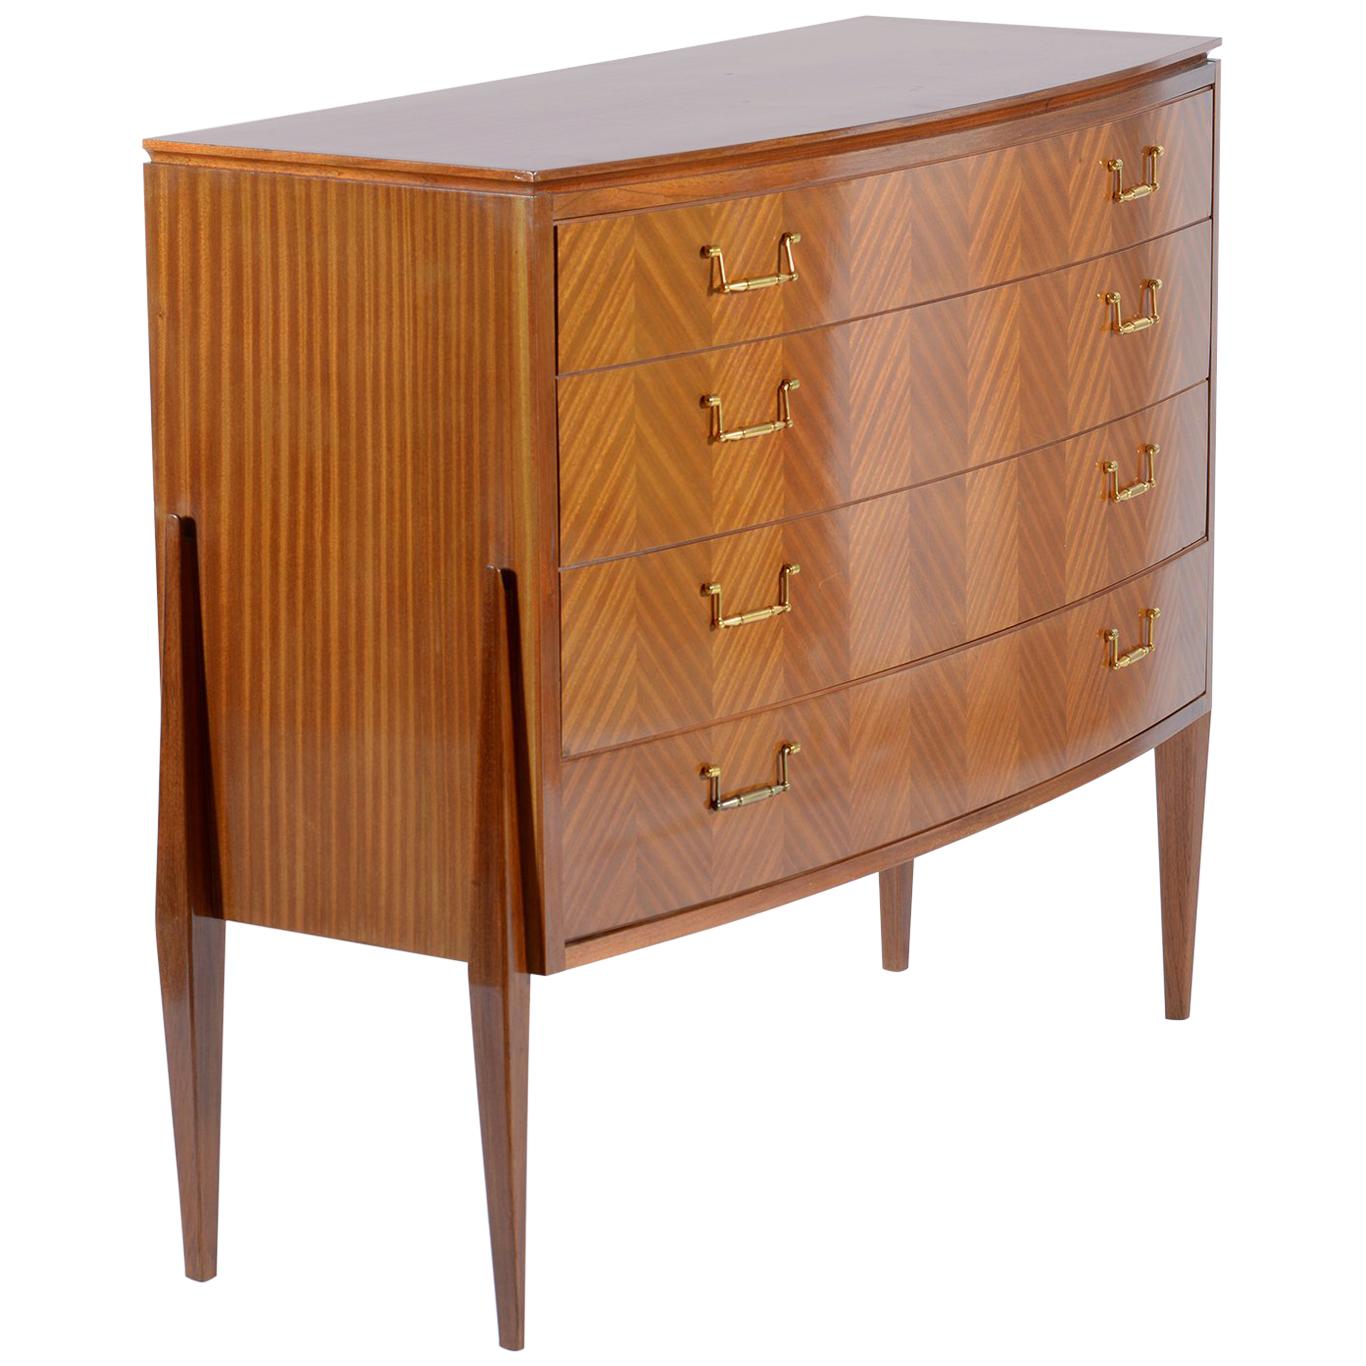 Fagioli Midcentury Florentine Curved Front Chest, Four Drawers Brass Handles